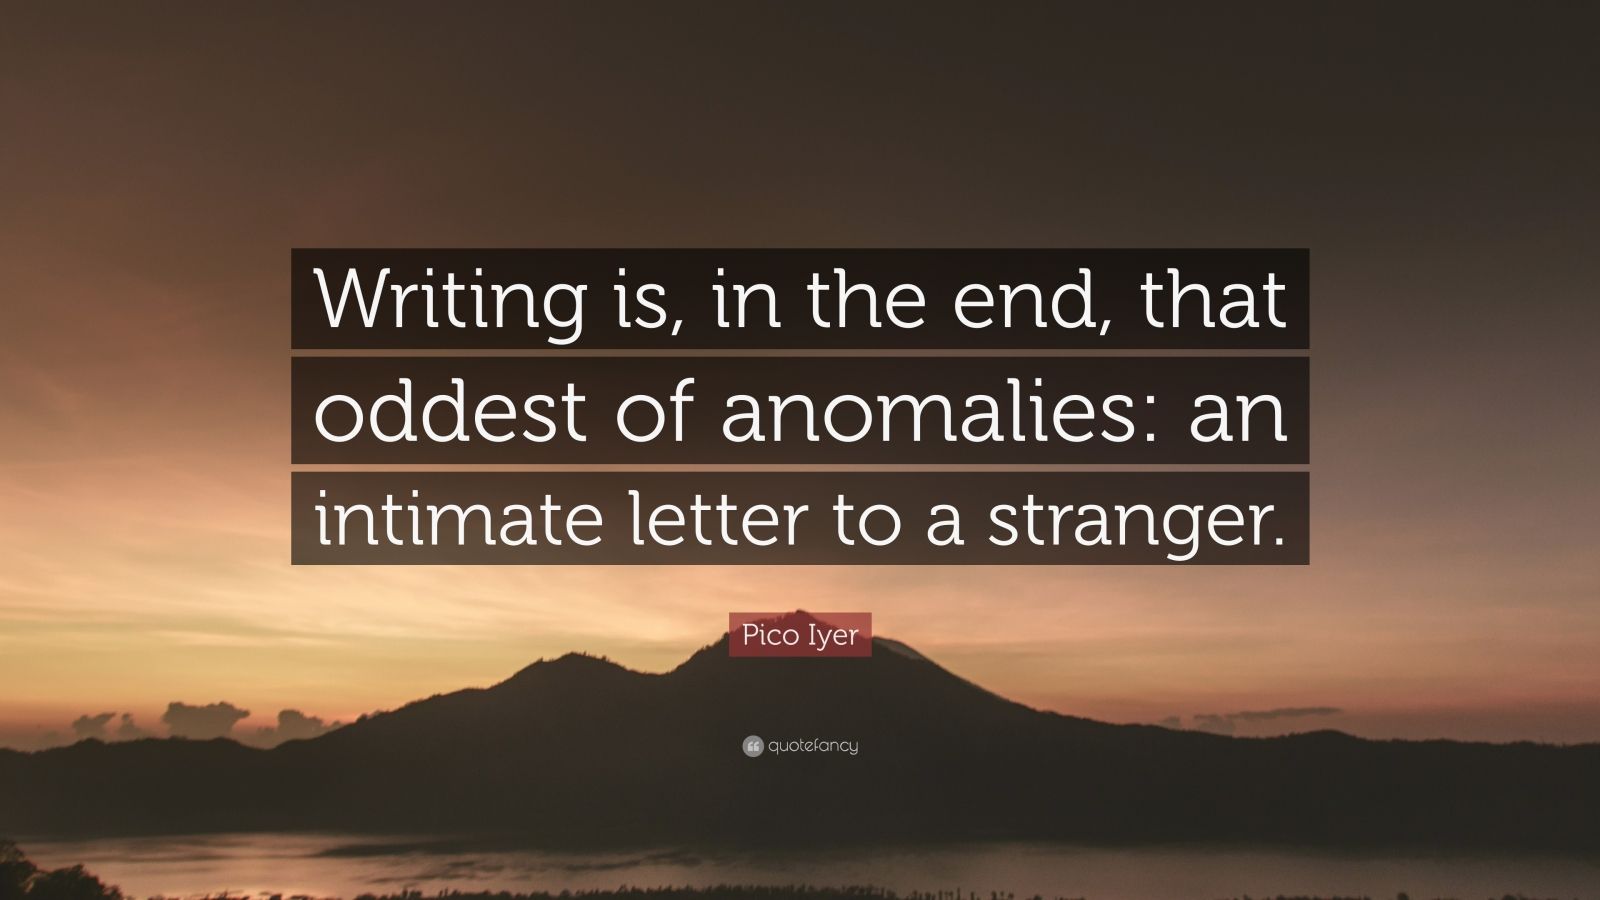 Pico Iyer Quote: “Writing is, in the end, that oddest of anomalies: an